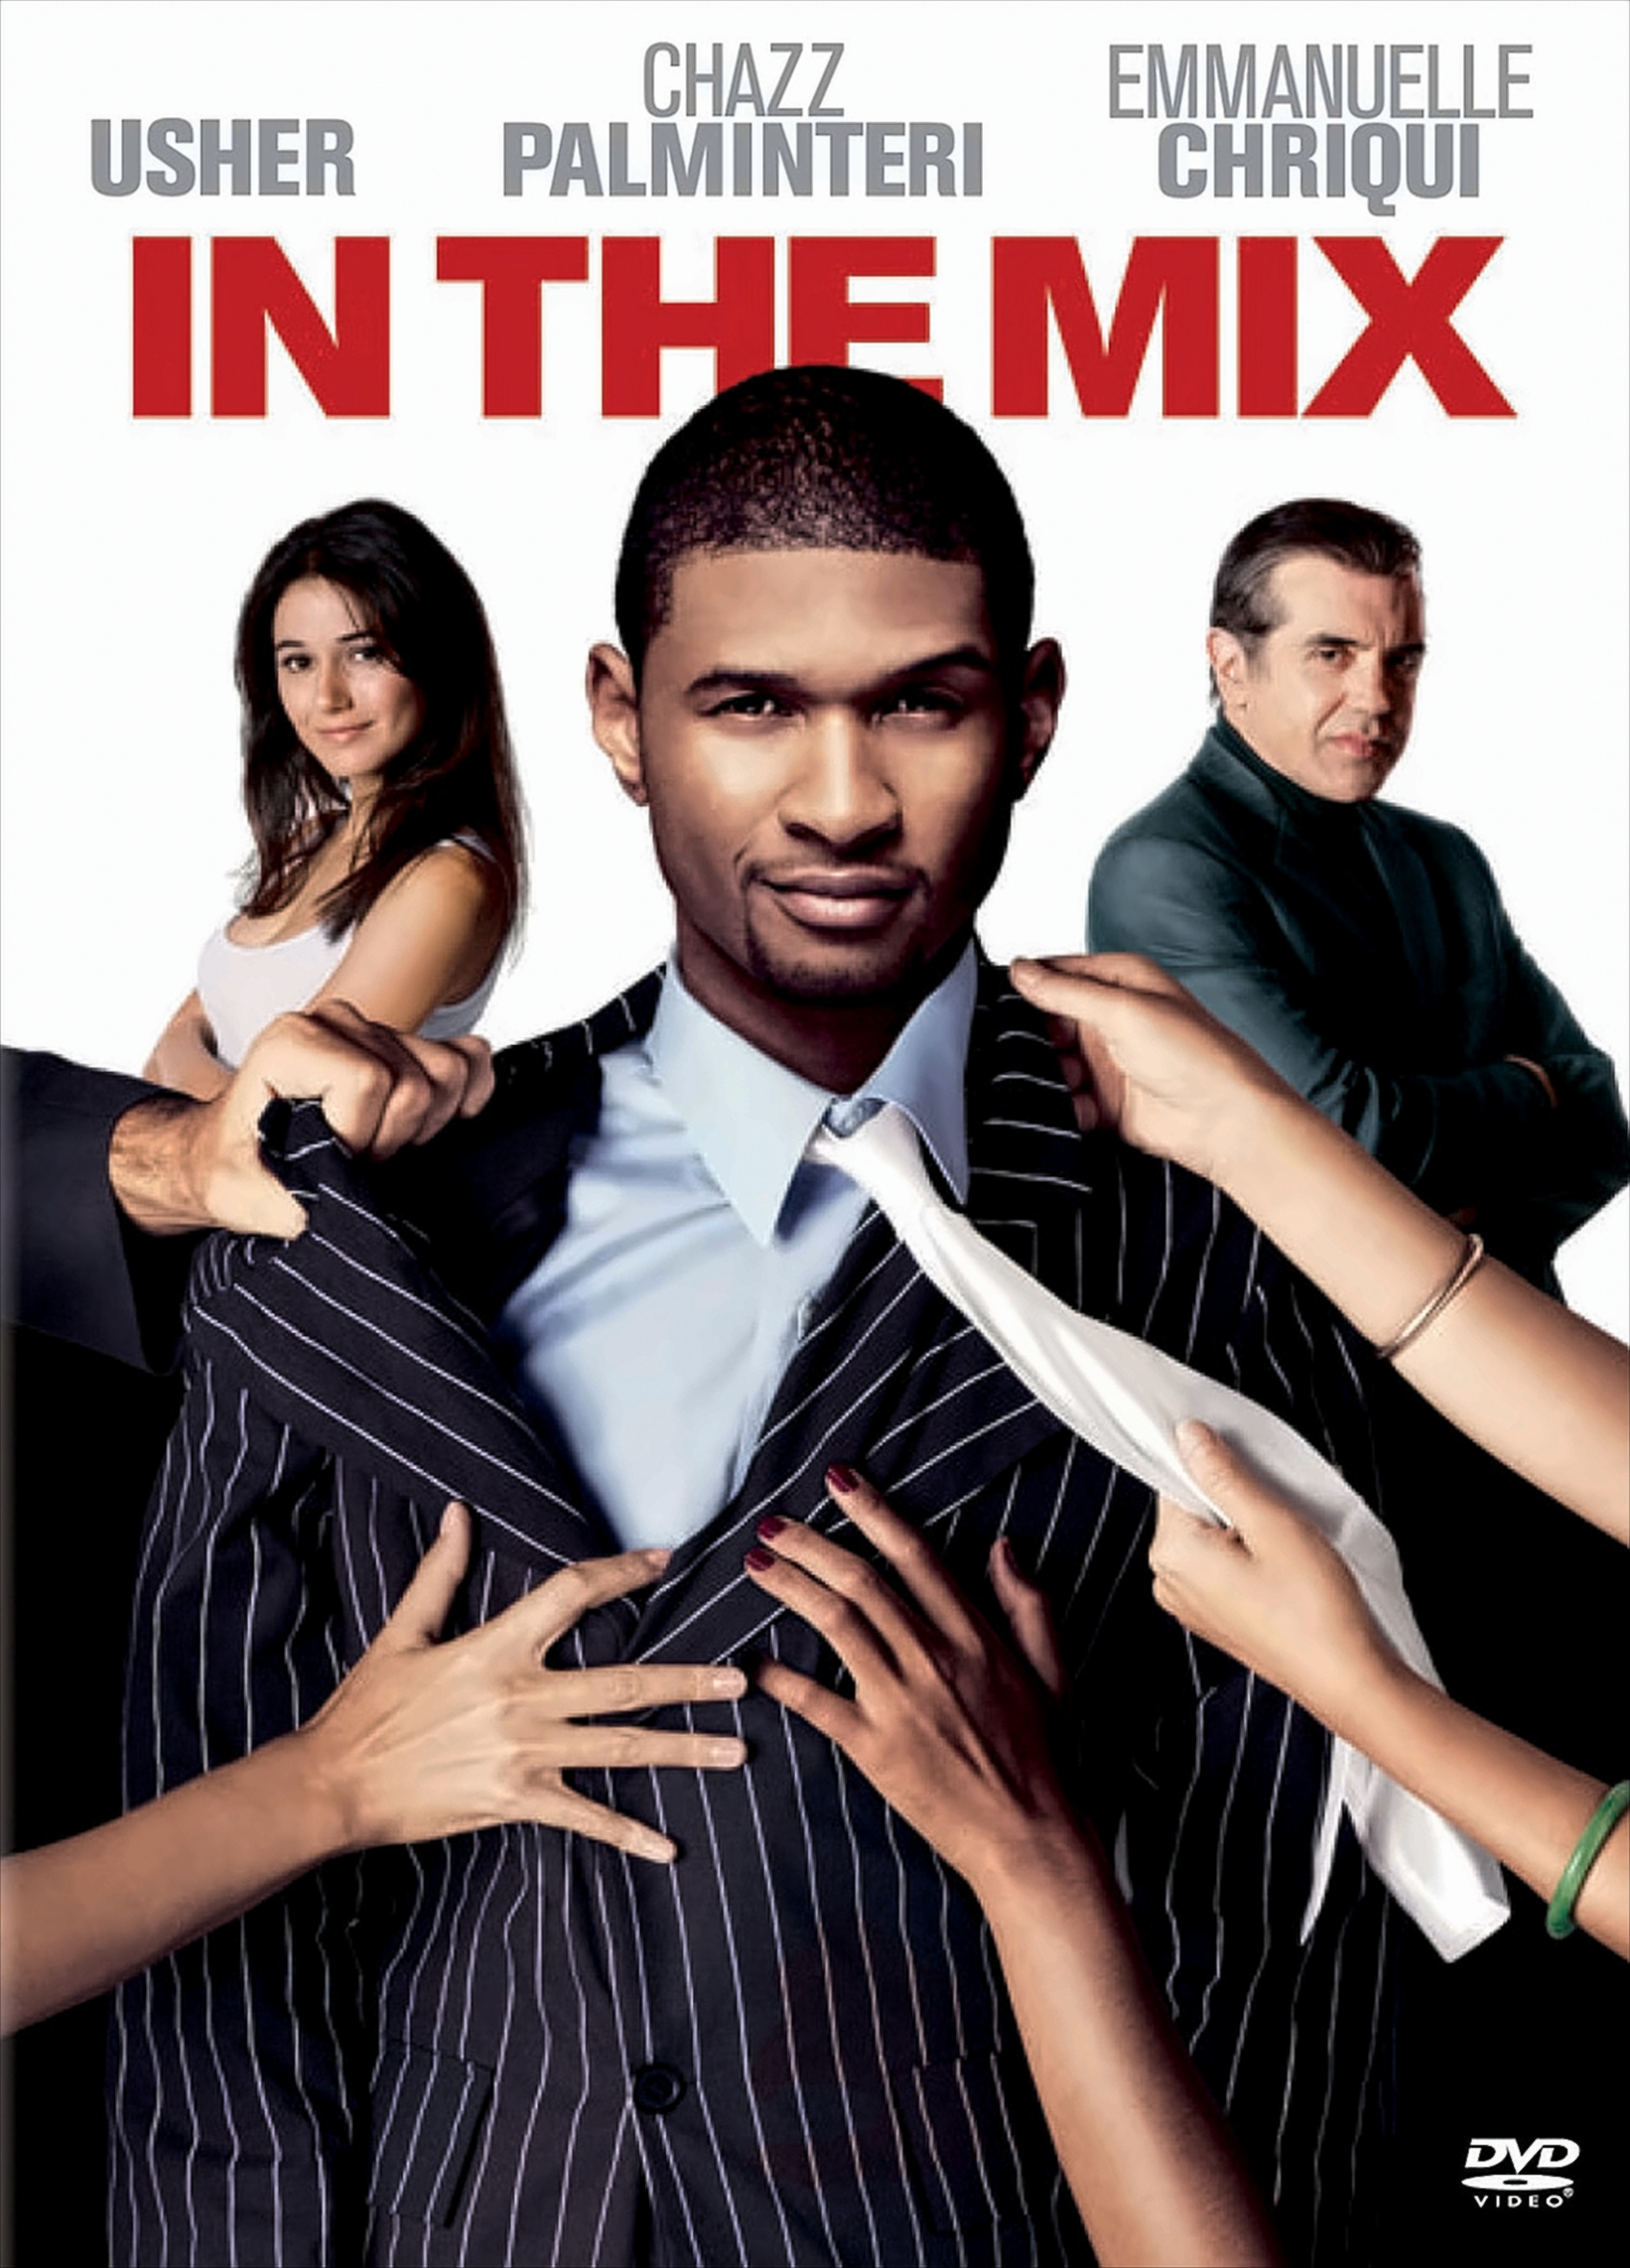 In the Mix DVD